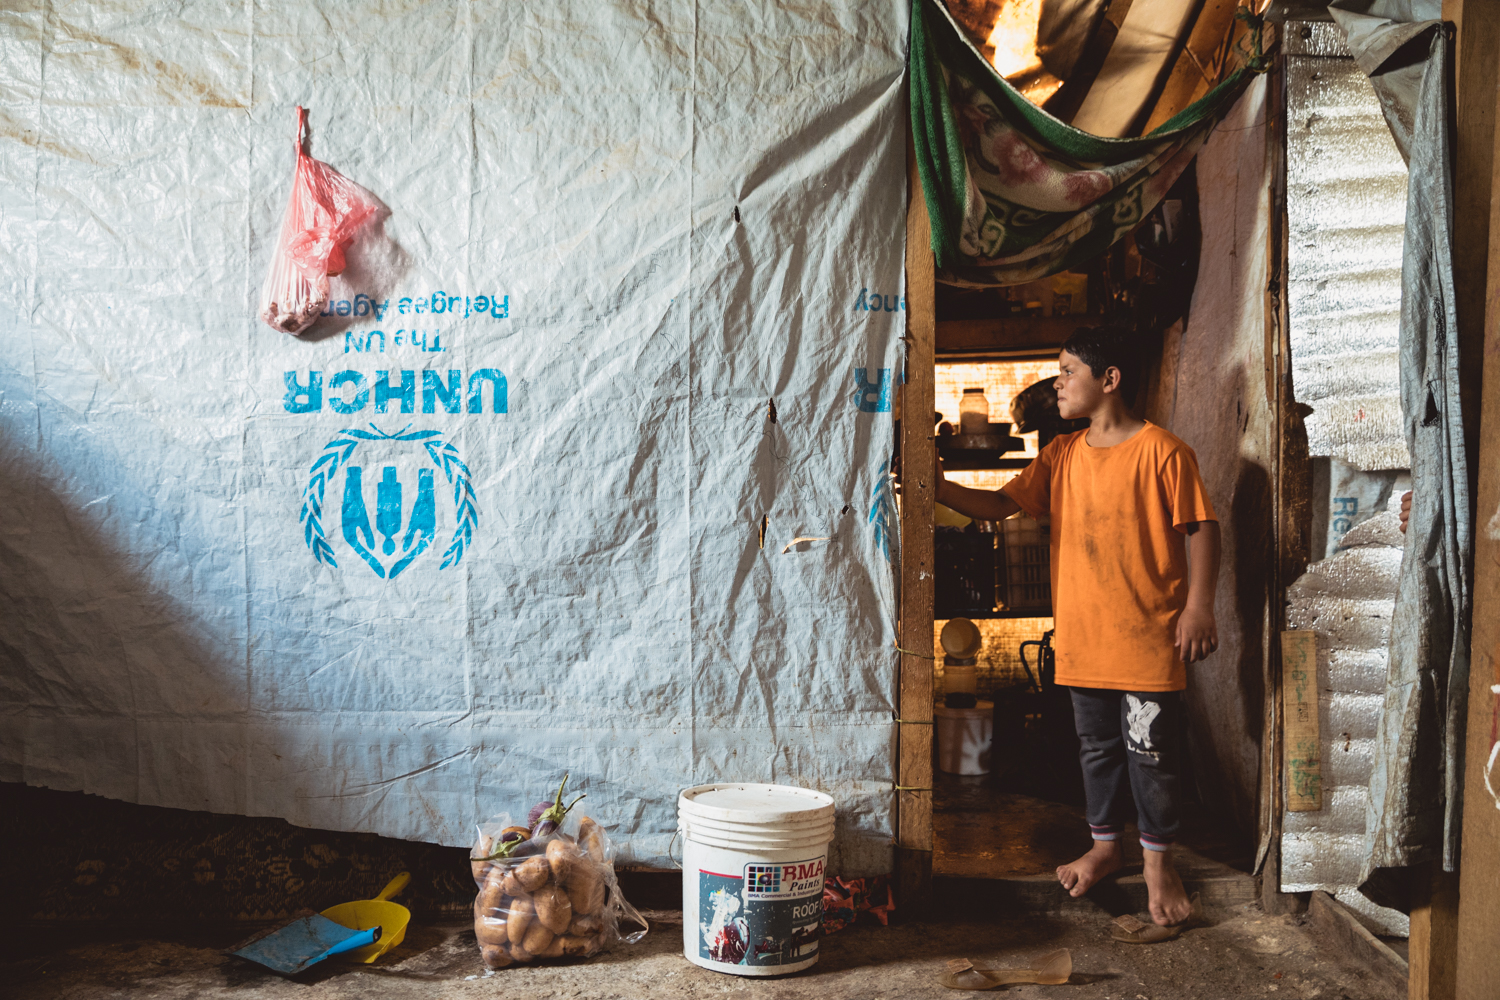  A young boy waits for his turn to wash himself inside the tent he and his family live in.  